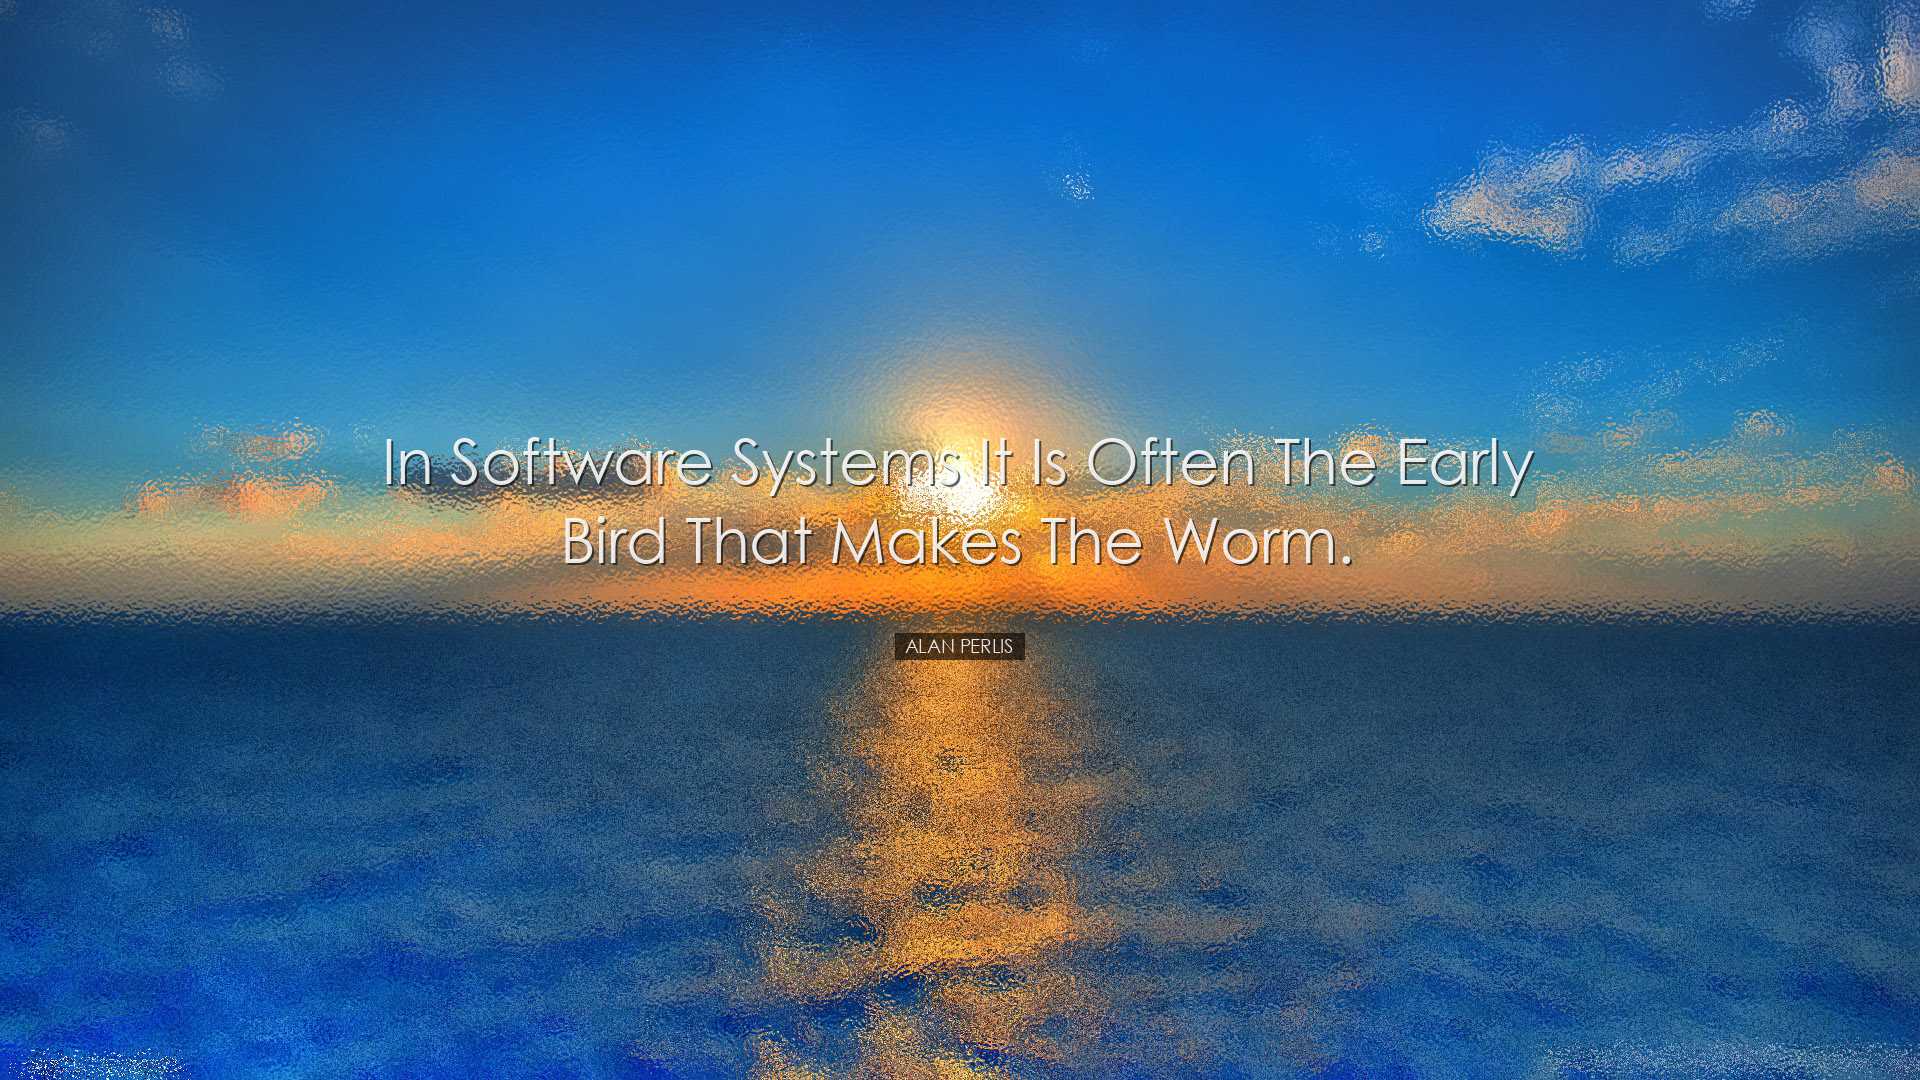 In software systems it is often the early bird that makes the worm